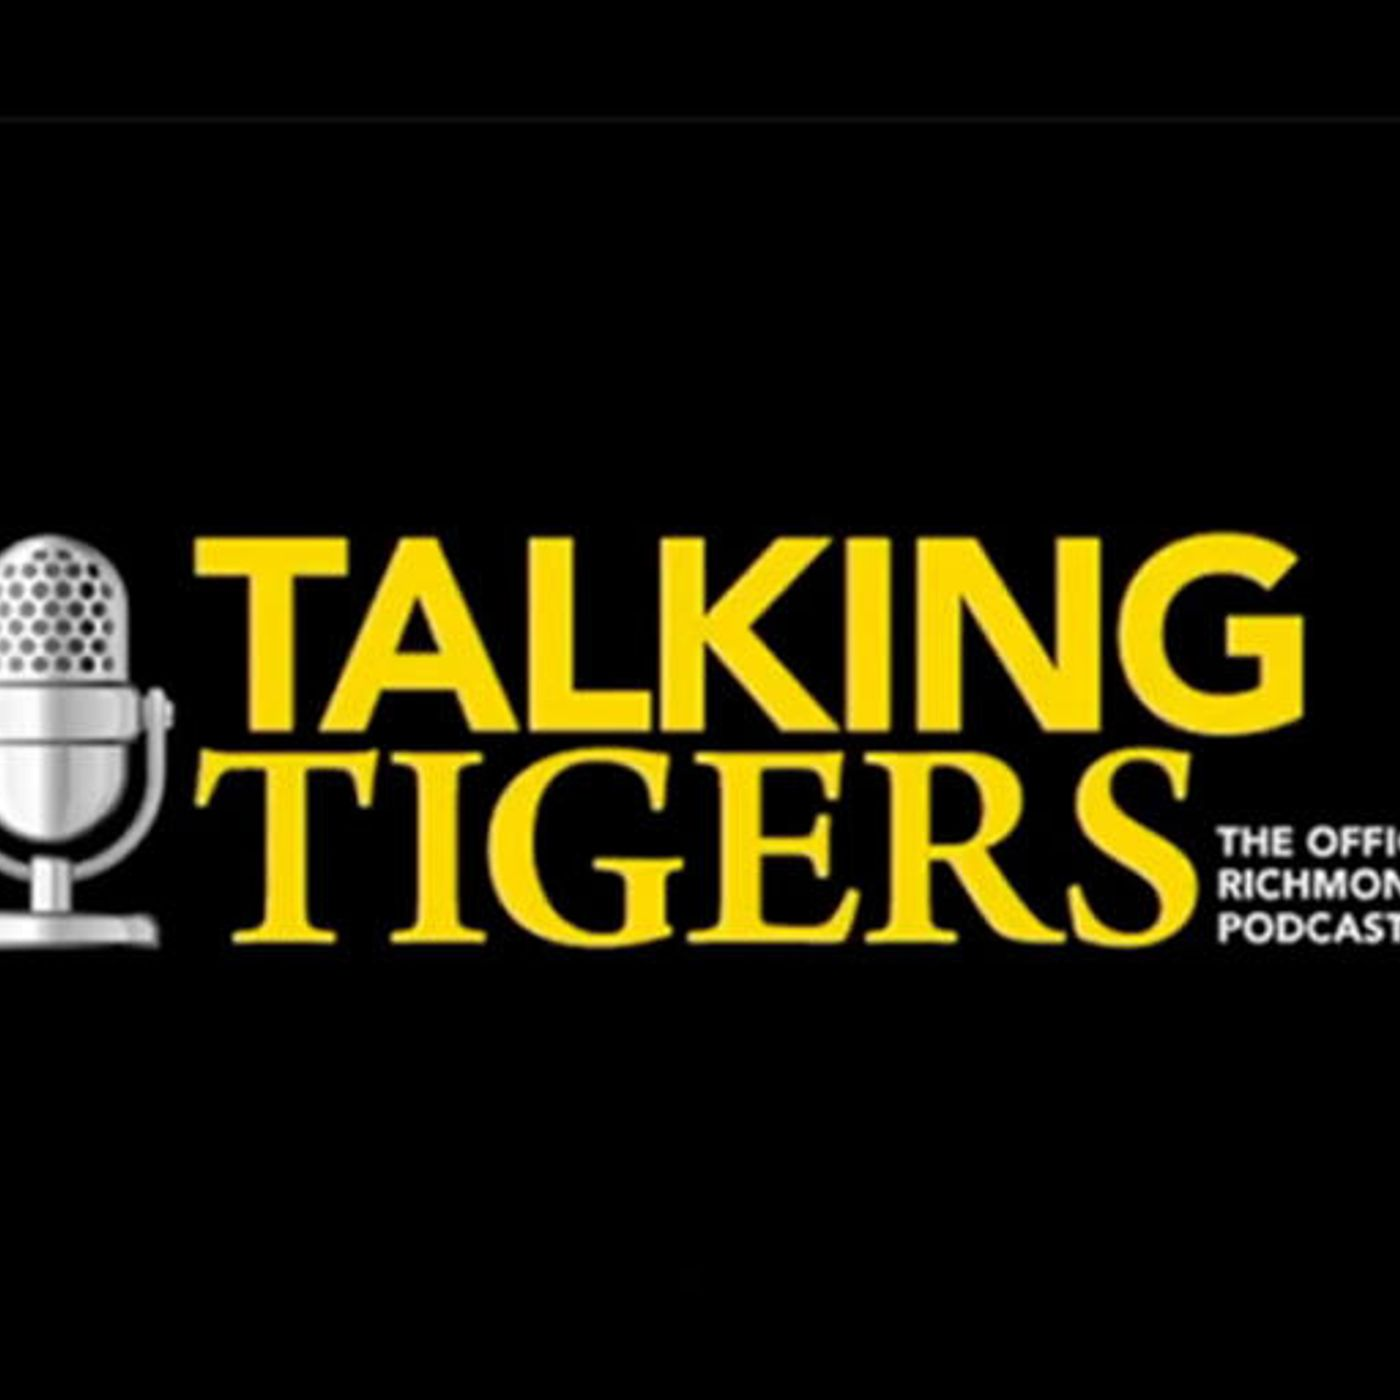 2019 Episode 1: Talking Tigers 2019 Launch